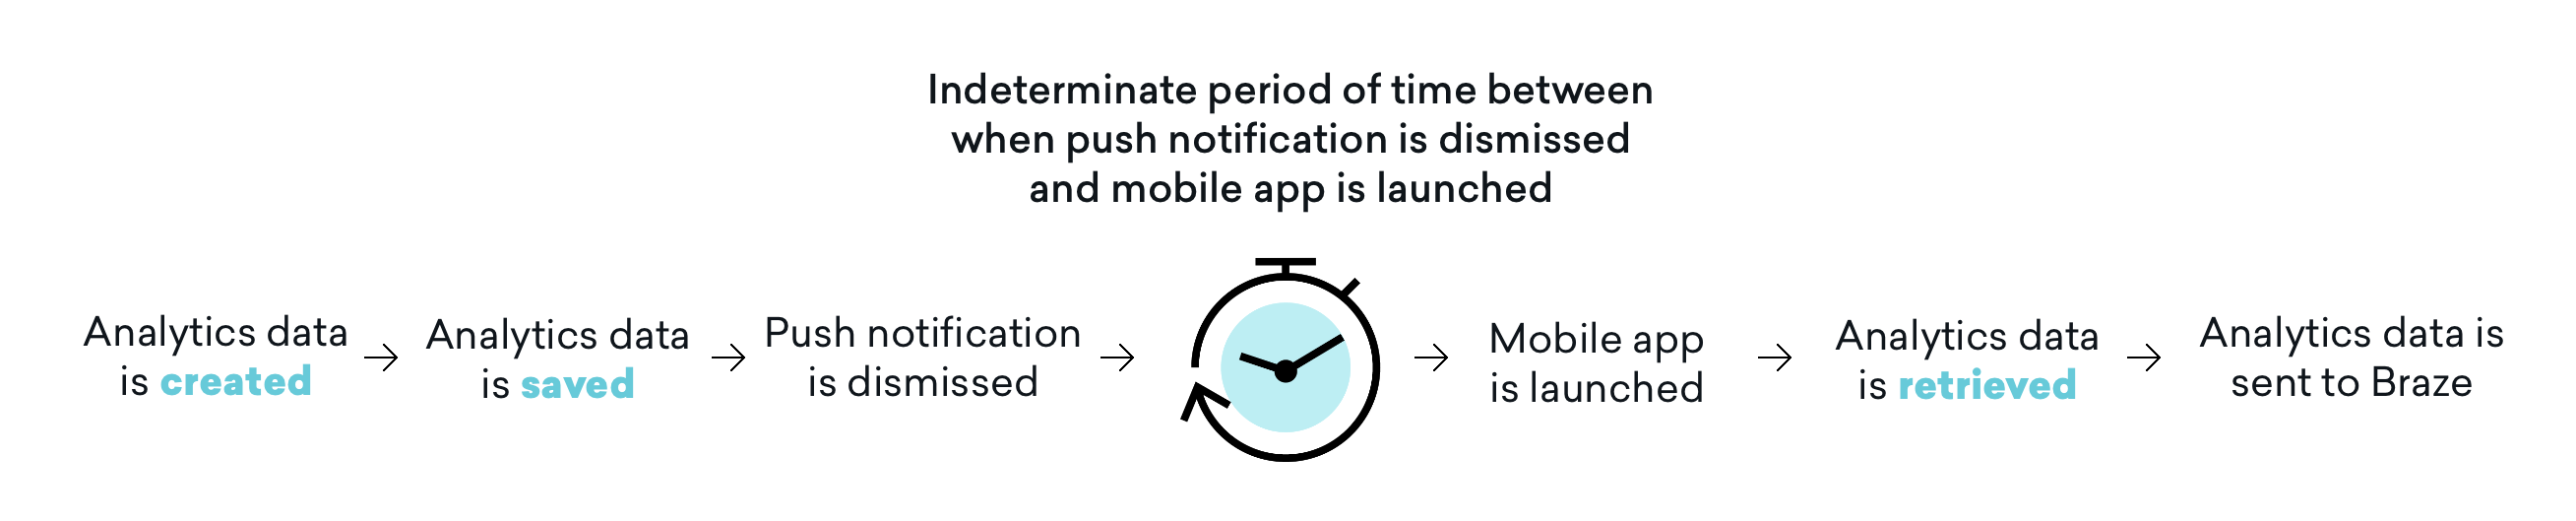 A graphic describing how analytics are processed in Braze. 1. Analytics data is created. 2. Analytics data is saved. 3. Push notification is dismissed. 4. Indeterminate period of time between when push notification is dismissed and mobile app is launched. 5. Mobile app is launched. 6. Analytics data is recieved. 7. Analytics data is sent to Braze.